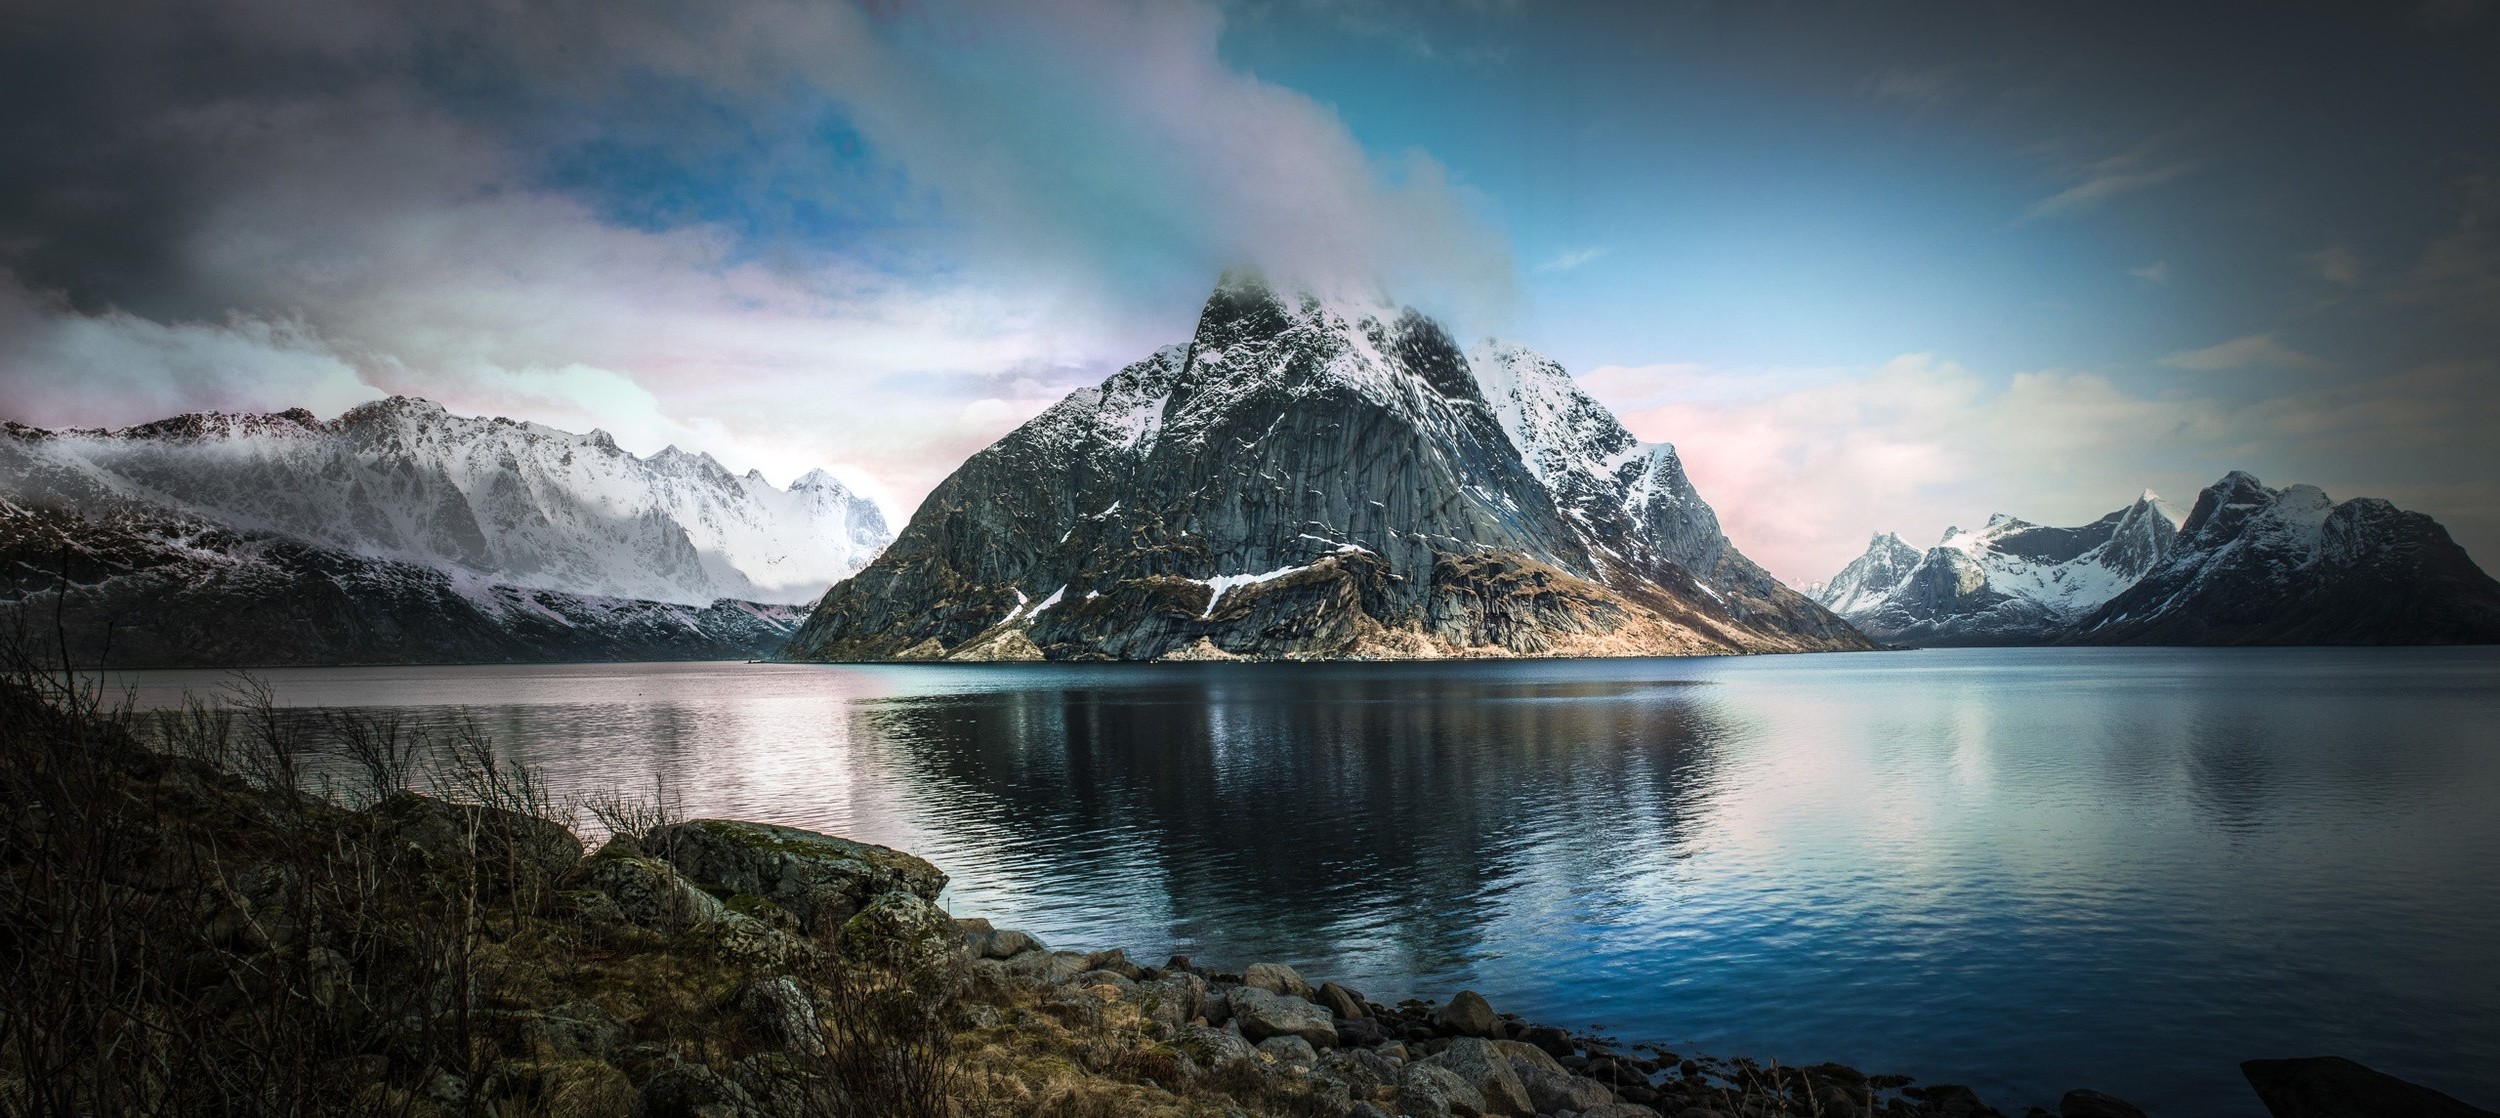 nature, Landscape, Fjord, Mountain, Snowy Peak, Clouds, Norway, Spring